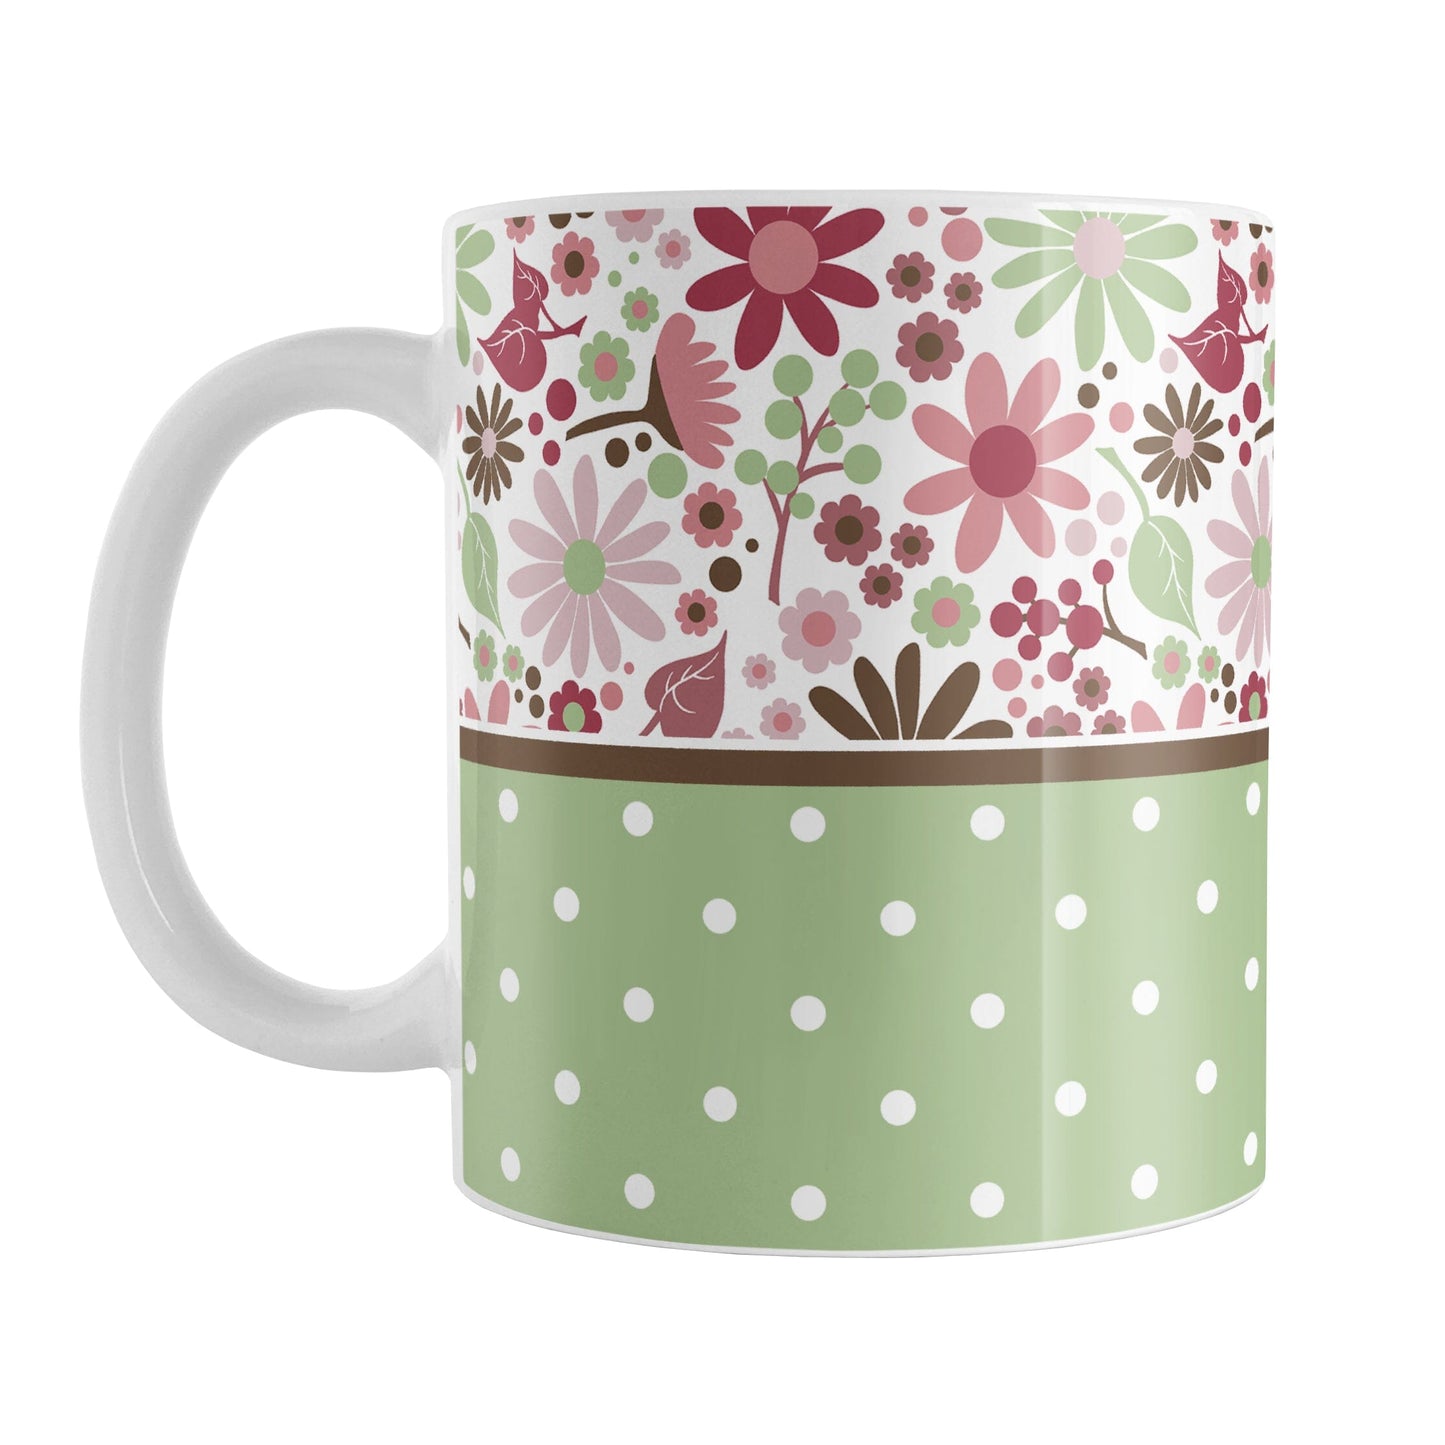 Berry Green Summer Flowers Polka Dot Mug (11oz) at Amy's Coffee Mugs. A ceramic coffee mug designed with a pretty floral pattern in a gorgeous berry pink color palette, with sage green and brown along the top, and a green polka dot pattern along the bottom. These patterns wrap around the mug to the handle.